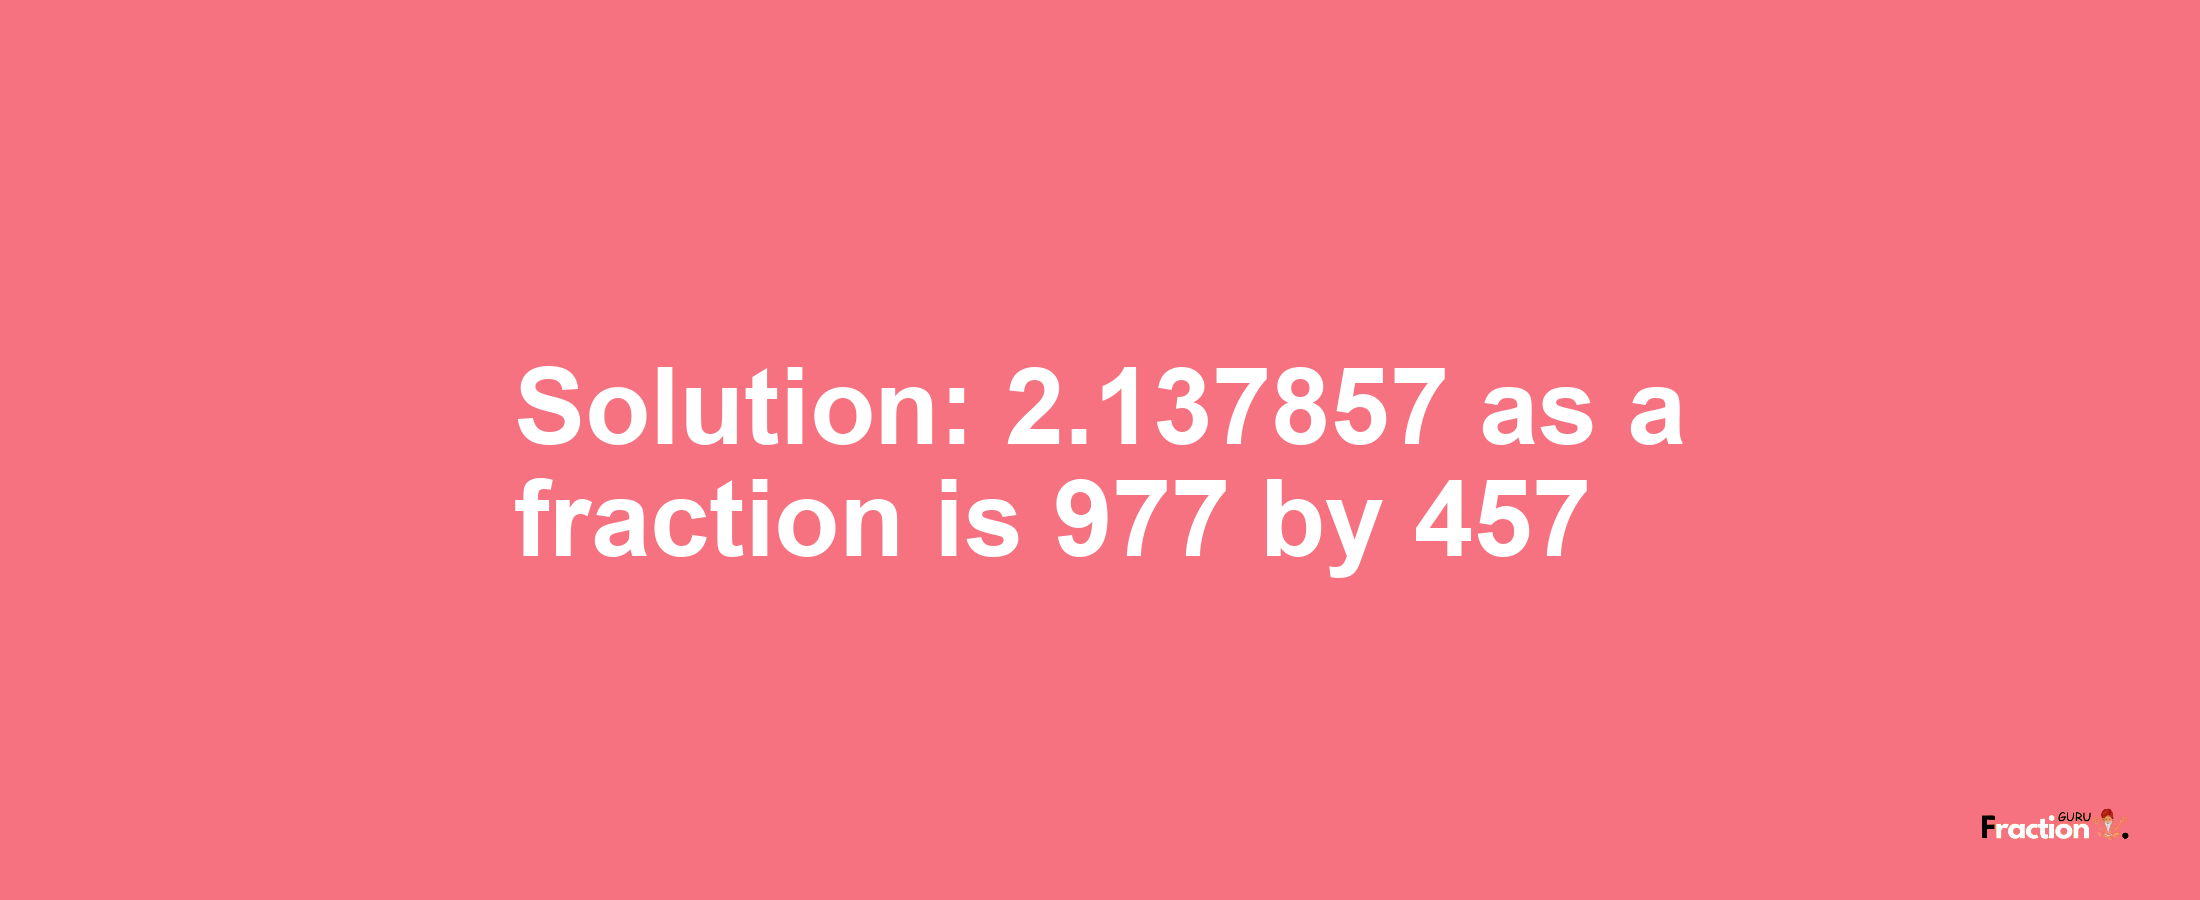 Solution:2.137857 as a fraction is 977/457